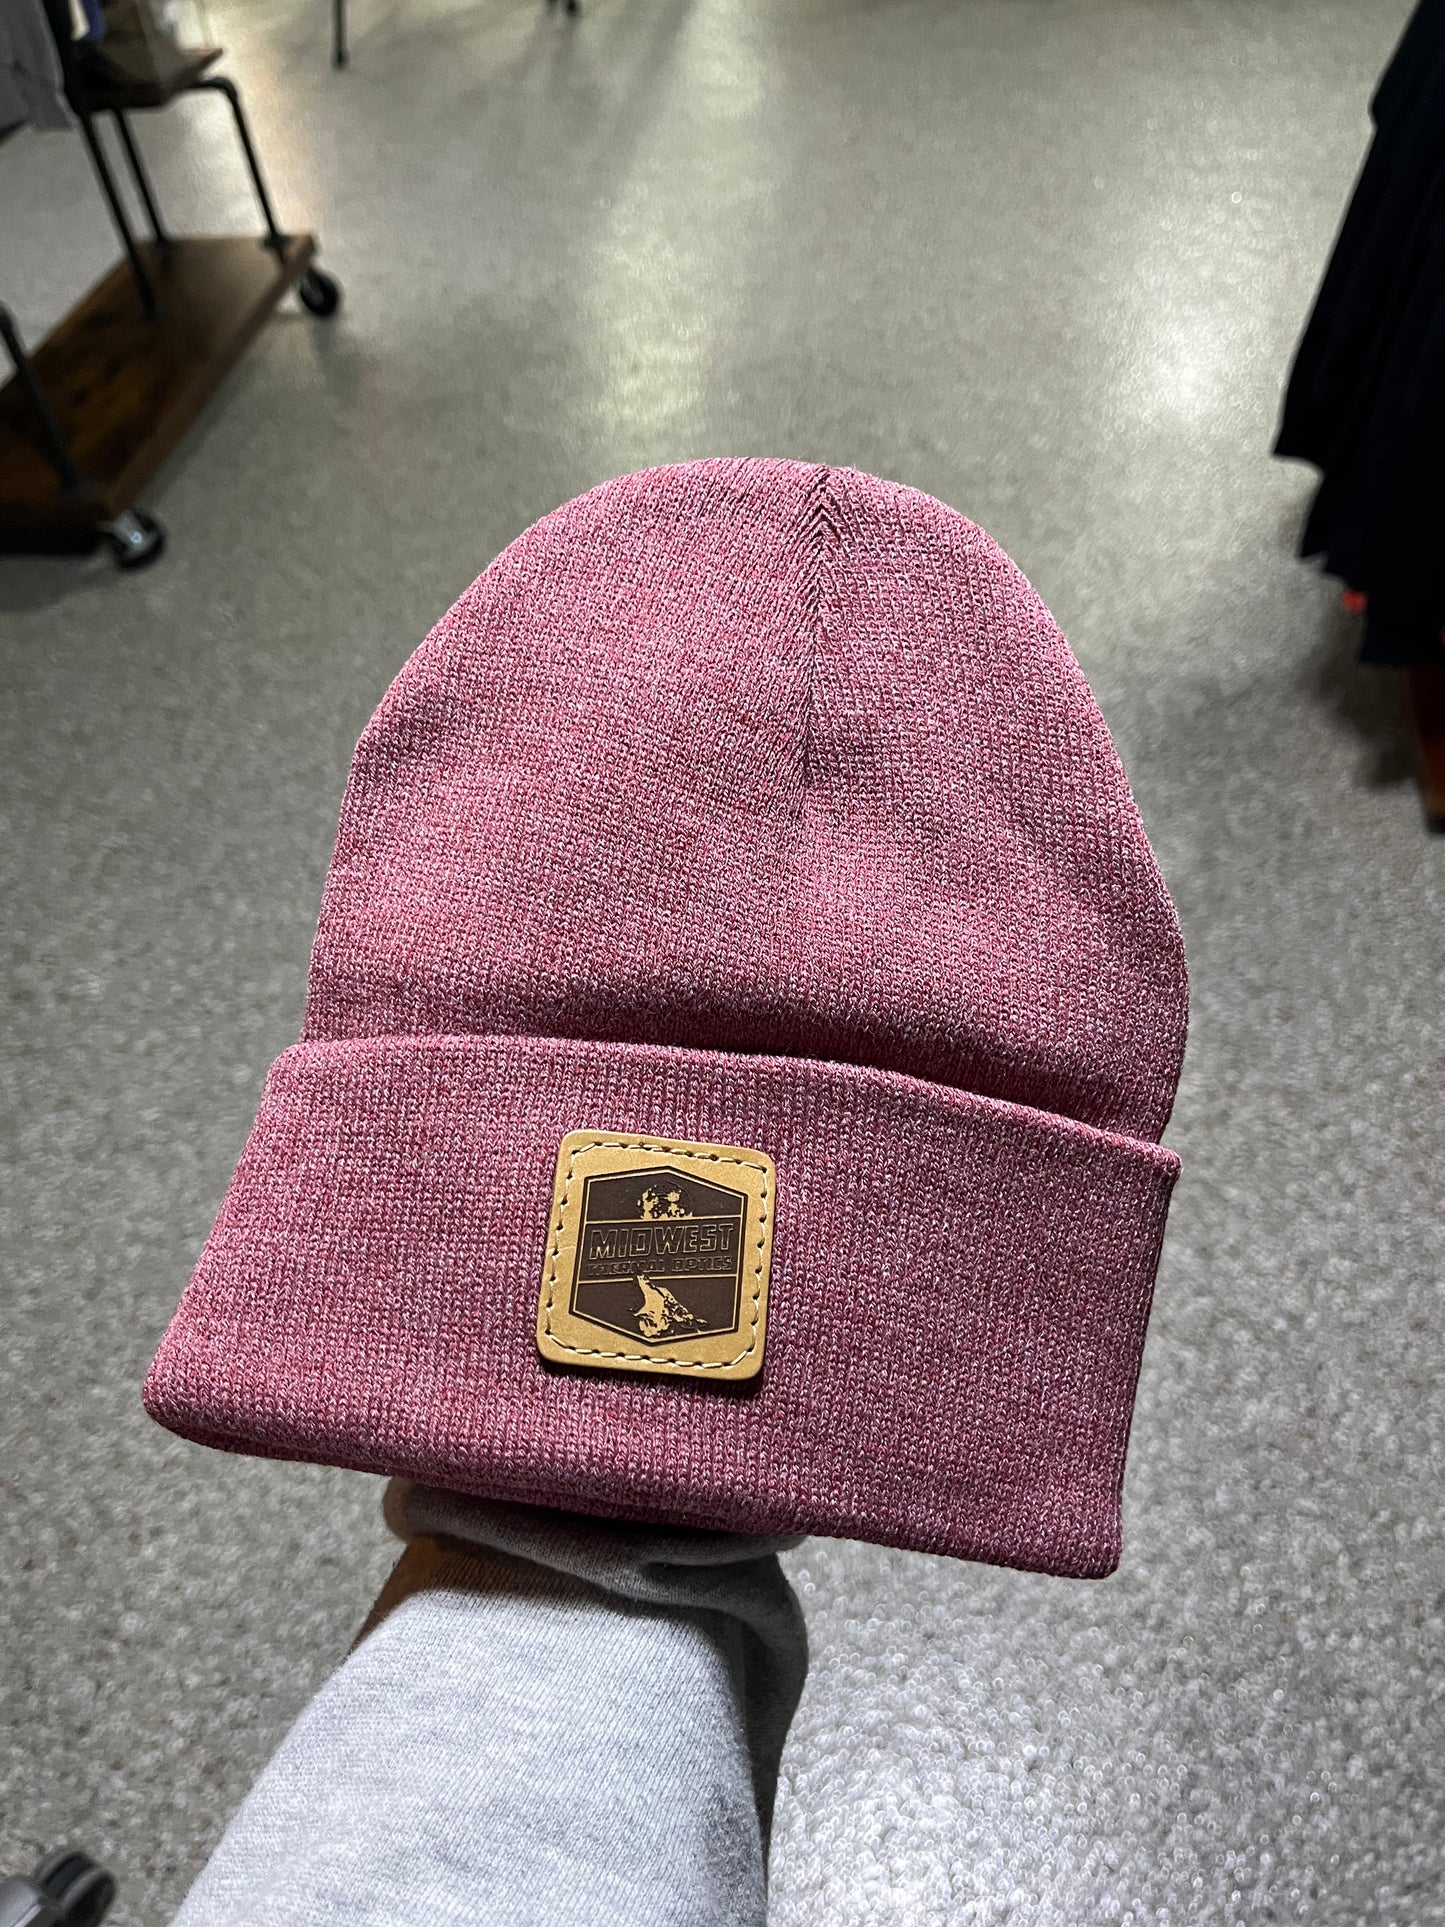 Midwest Thermal Optics Beanie